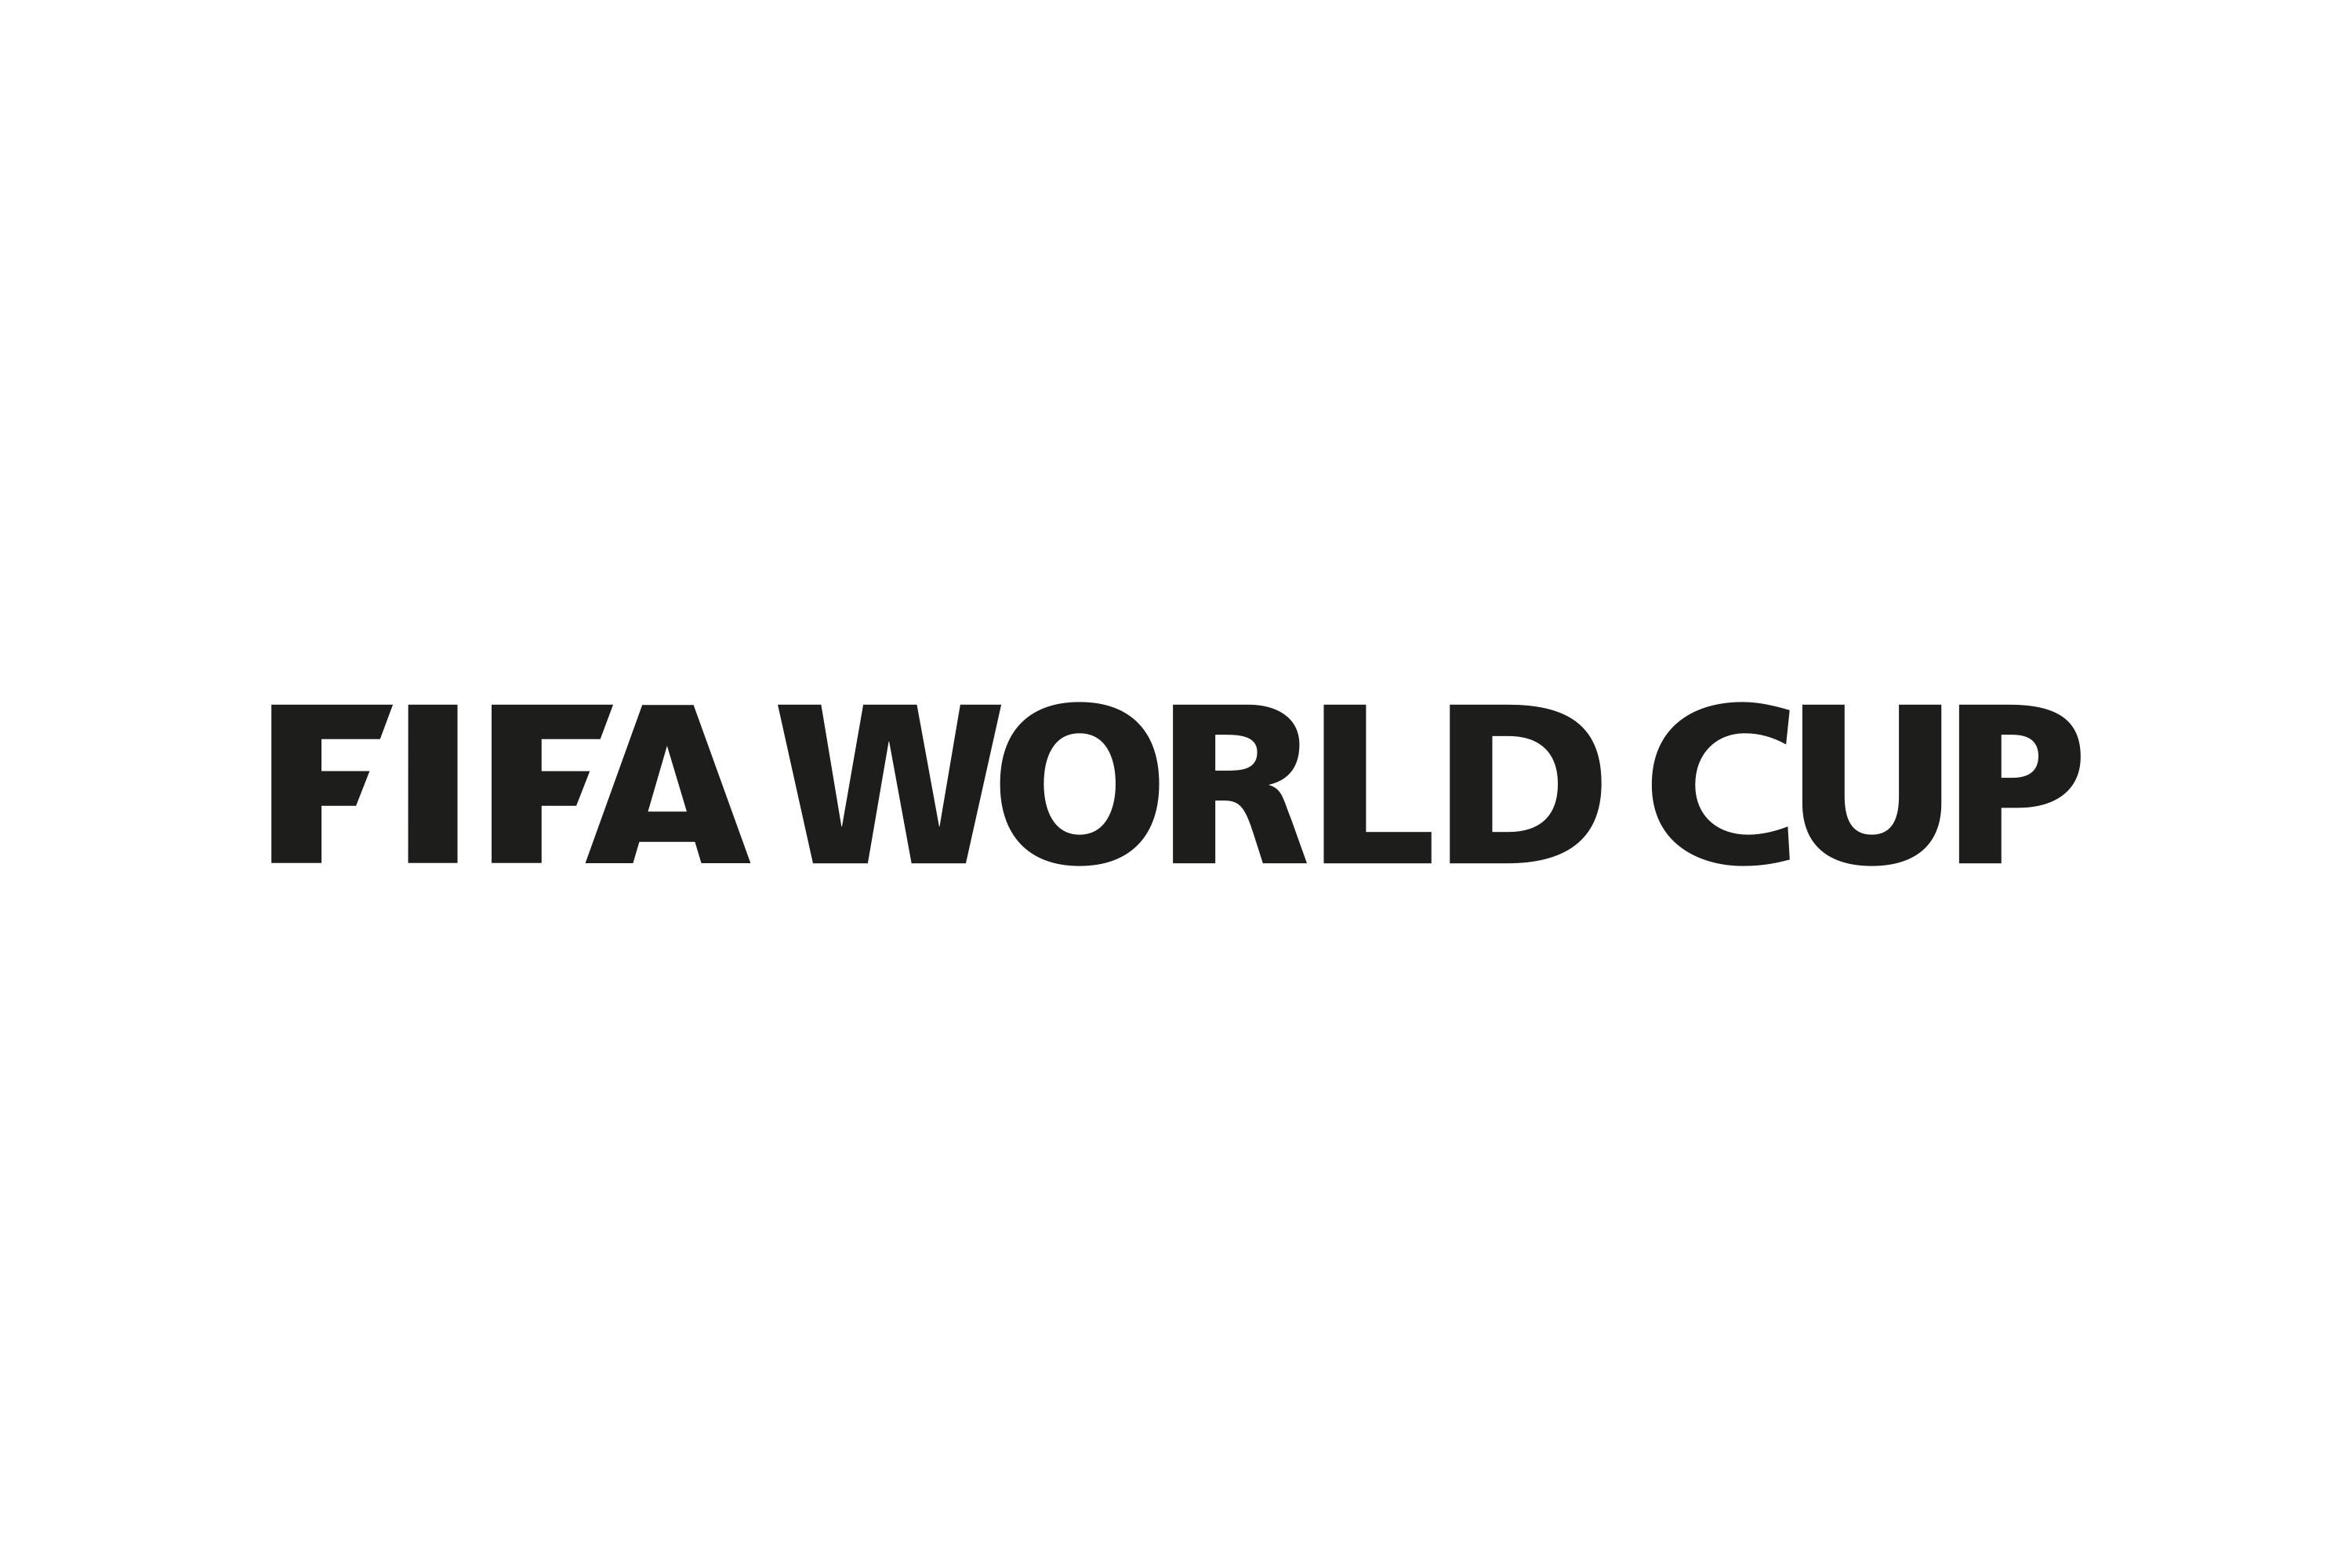 Download FIFA World Cup Logo in SVG Vector or PNG File Format Logo.wine